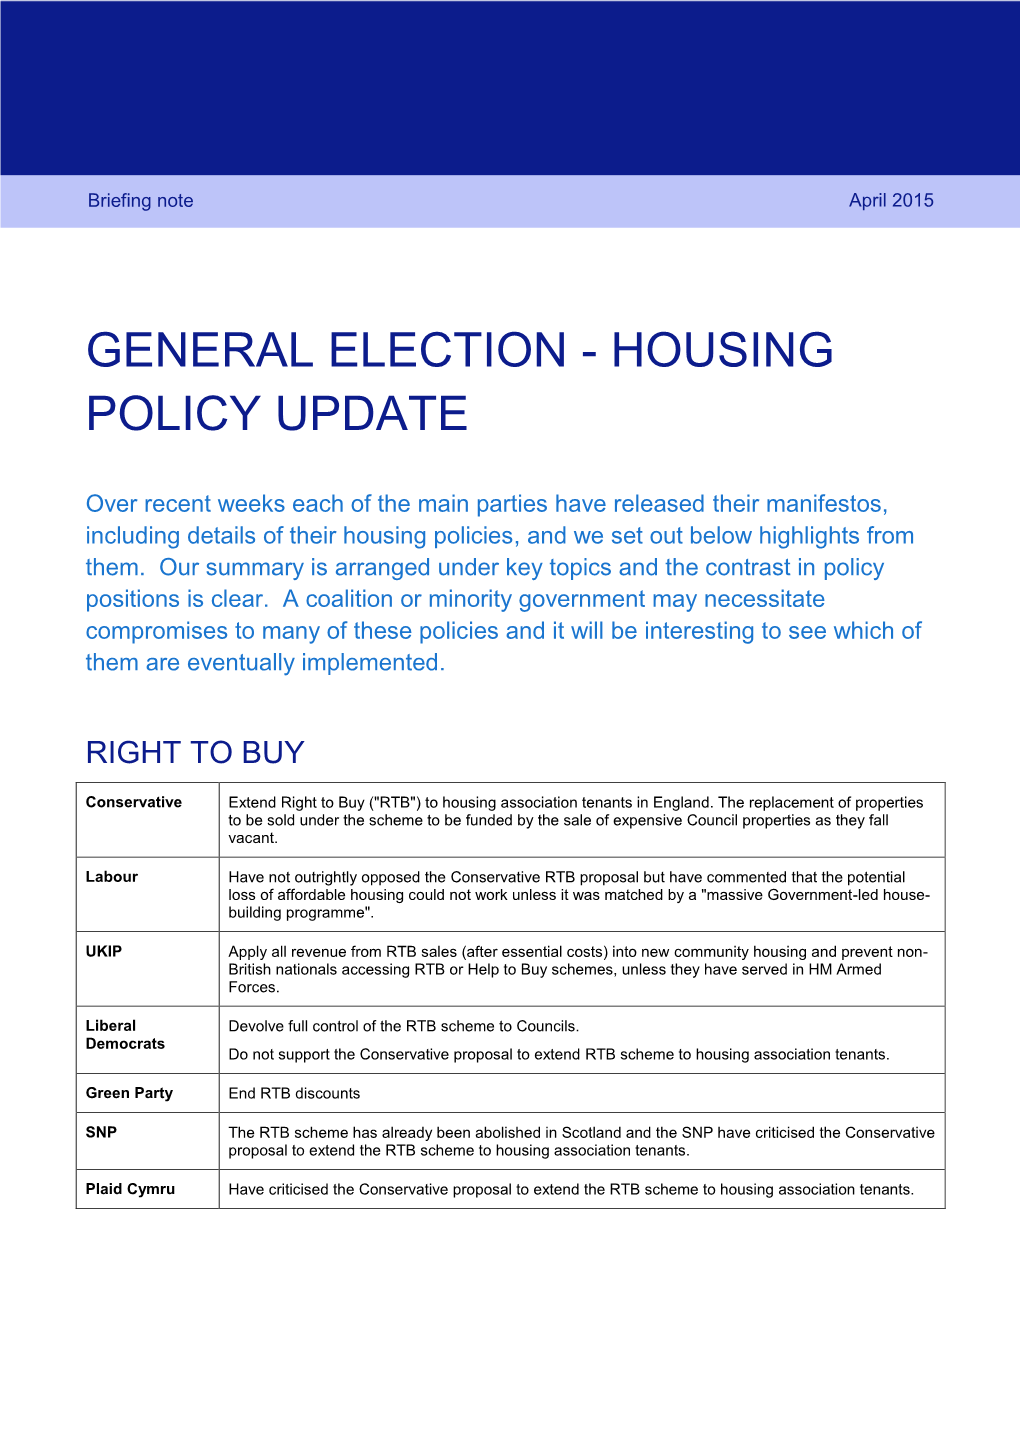 General Election - Housing Policy Update 1